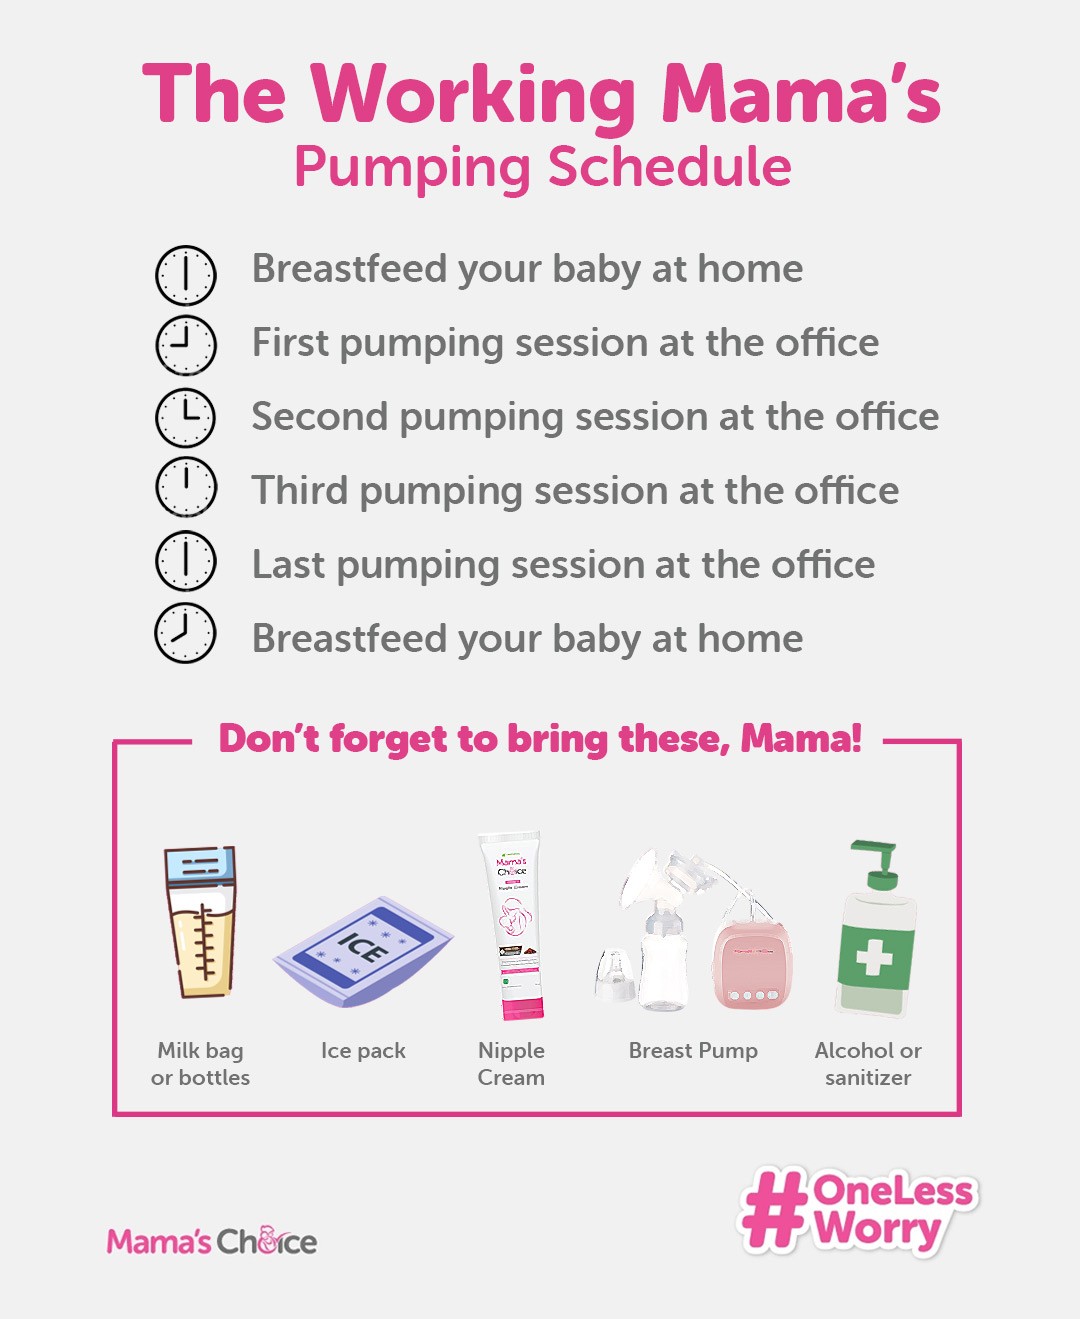 Pumping schedule for working mamas